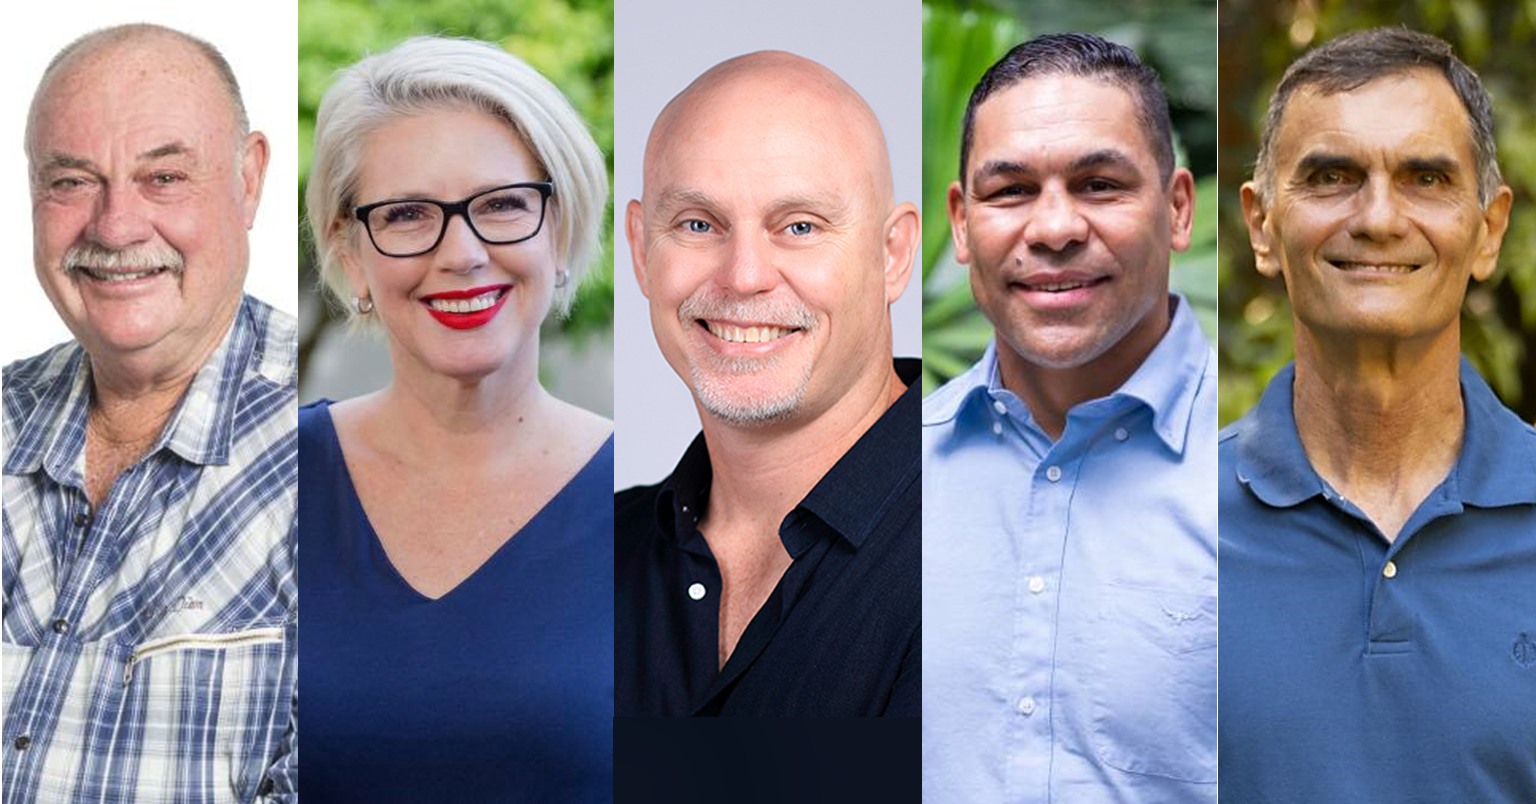 Five Leichhardt candidates speak in Cairns today about tourism, taxes and skills shortages